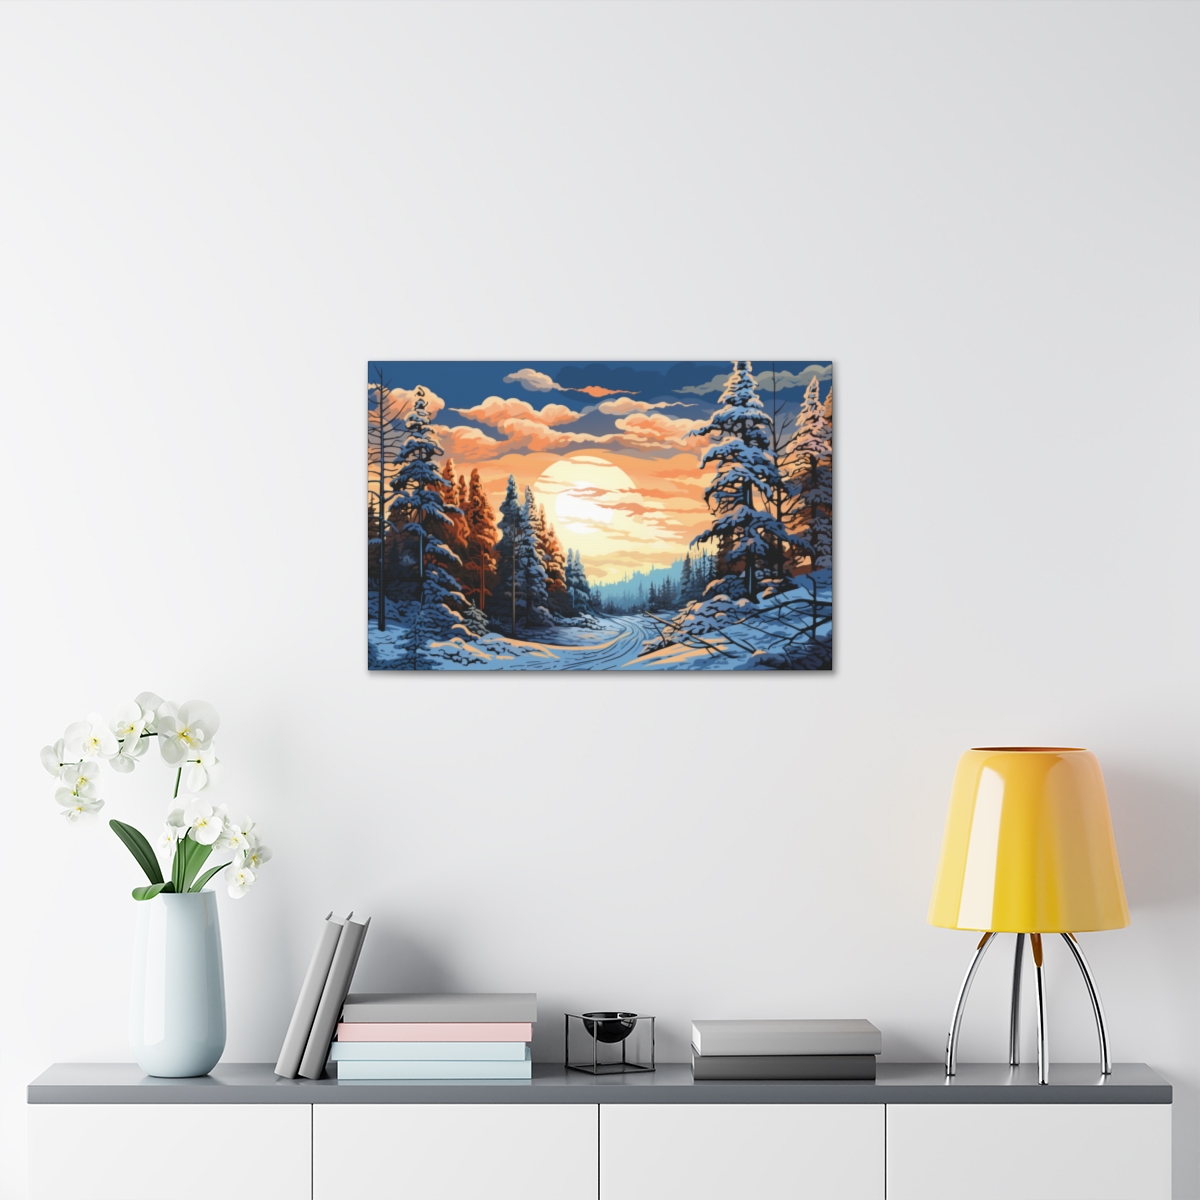 Winter Forest Art Canvas Print: Winter's Lullaby